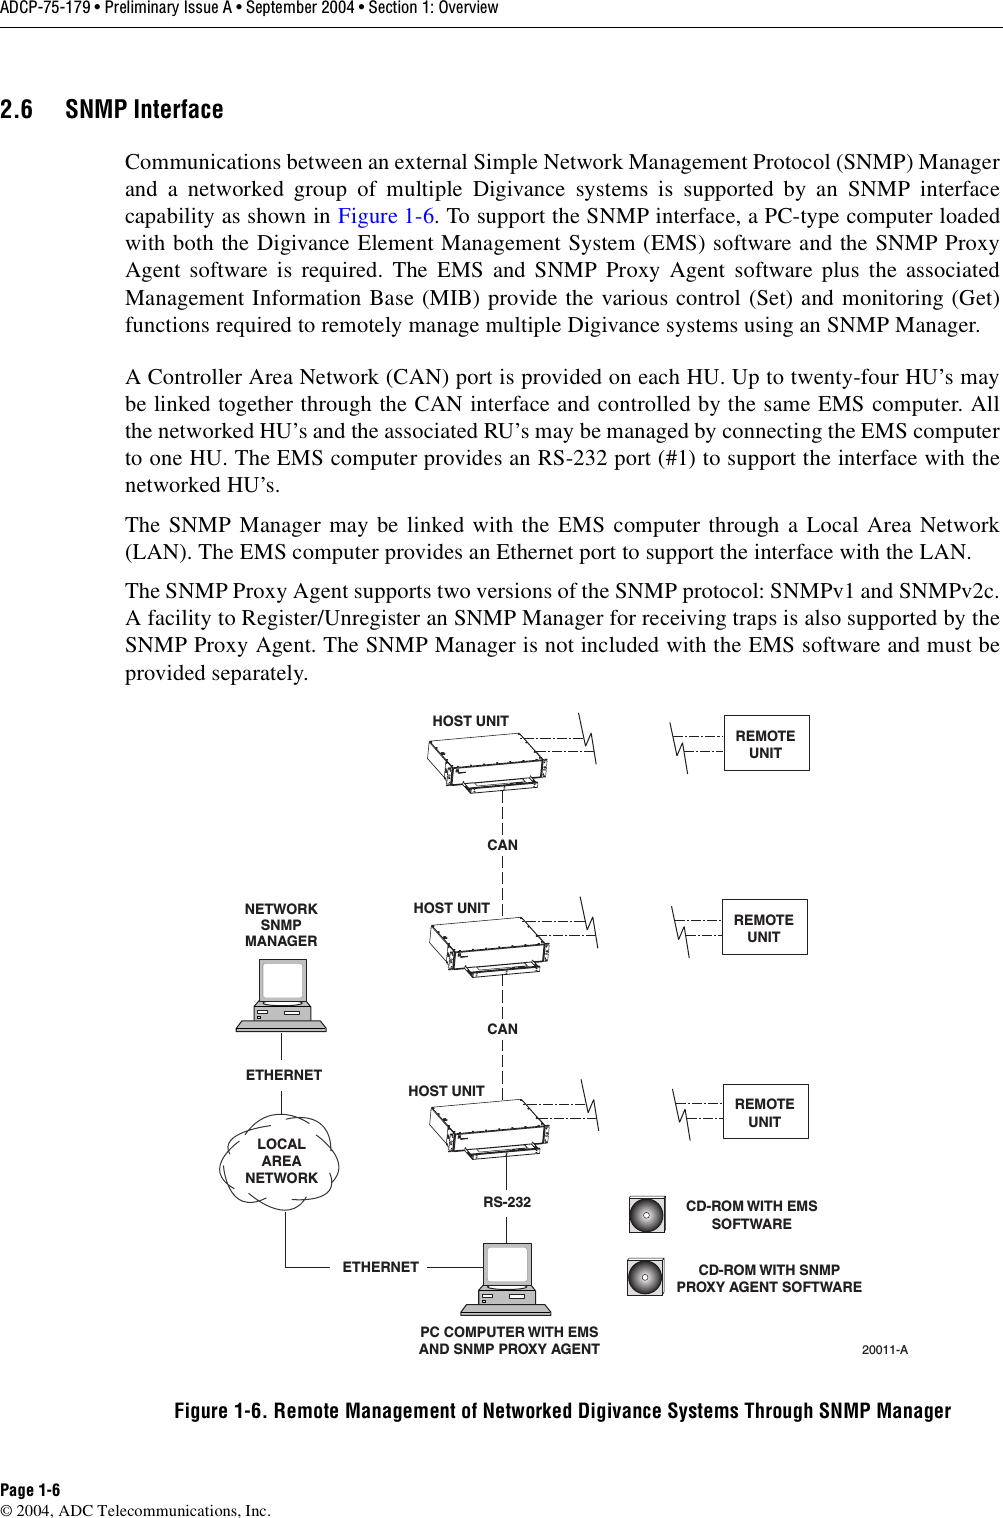 ADCP-75-179 • Preliminary Issue A • September 2004 • Section 1: OverviewPage 1-6© 2004, ADC Telecommunications, Inc.2.6 SNMP InterfaceCommunications between an external Simple Network Management Protocol (SNMP) Managerand a networked group of multiple Digivance systems is supported by an SNMP interfacecapability as shown in Figure 1-6. To support the SNMP interface, a PC-type computer loadedwith both the Digivance Element Management System (EMS) software and the SNMP ProxyAgent software is required. The EMS and SNMP Proxy Agent software plus the associatedManagement Information Base (MIB) provide the various control (Set) and monitoring (Get)functions required to remotely manage multiple Digivance systems using an SNMP Manager. A Controller Area Network (CAN) port is provided on each HU. Up to twenty-four HU’s maybe linked together through the CAN interface and controlled by the same EMS computer. Allthe networked HU’s and the associated RU’s may be managed by connecting the EMS computerto one HU. The EMS computer provides an RS-232 port (#1) to support the interface with thenetworked HU’s. The SNMP Manager may be linked with the EMS computer through a Local Area Network(LAN). The EMS computer provides an Ethernet port to support the interface with the LAN. The SNMP Proxy Agent supports two versions of the SNMP protocol: SNMPv1 and SNMPv2c.A facility to Register/Unregister an SNMP Manager for receiving traps is also supported by theSNMP Proxy Agent. The SNMP Manager is not included with the EMS software and must beprovided separately. Figure 1-6. Remote Management of Networked Digivance Systems Through SNMP ManagerPC COMPUTER WITH EMSAND SNMP PROXY AGENTHOST UNITHOST UNITHOST UNITRS-23220011-ACD-ROM WITH EMSSOFTWARECD-ROM WITH SNMPPROXY AGENT SOFTWARECANCANLOCALAREANETWORKETHERNETNETWORKSNMPMANAGERETHERNETREMOTEUNITREMOTEUNITREMOTEUNIT